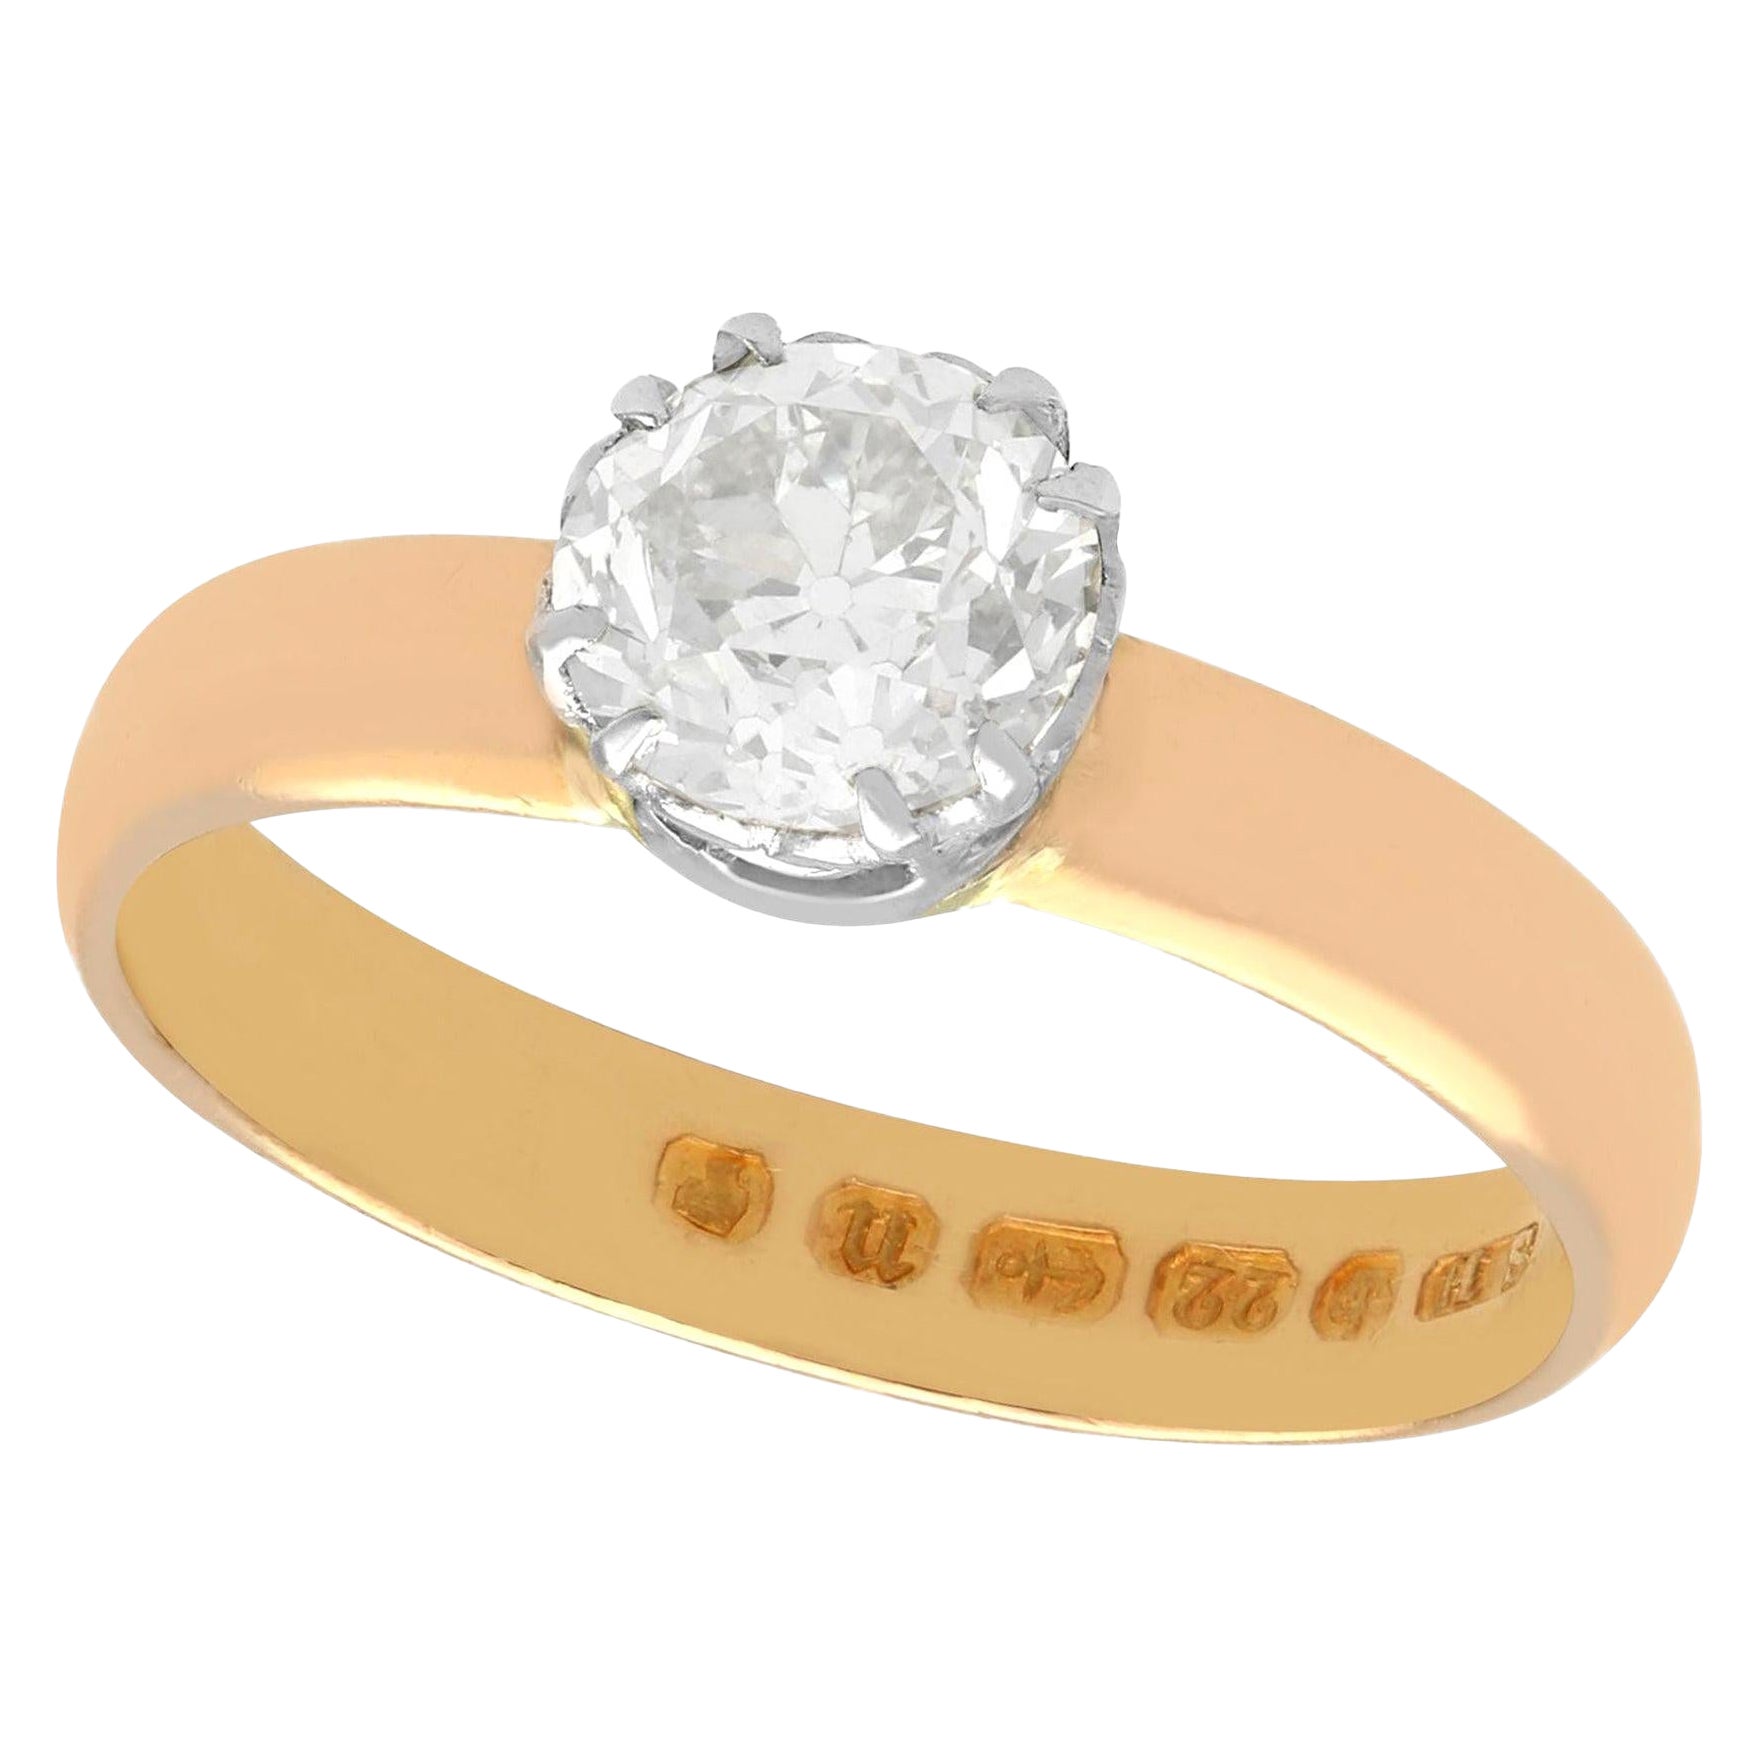 Victorian 1.34 Carat Diamond and 22k Rose Gold Solitaire Ring